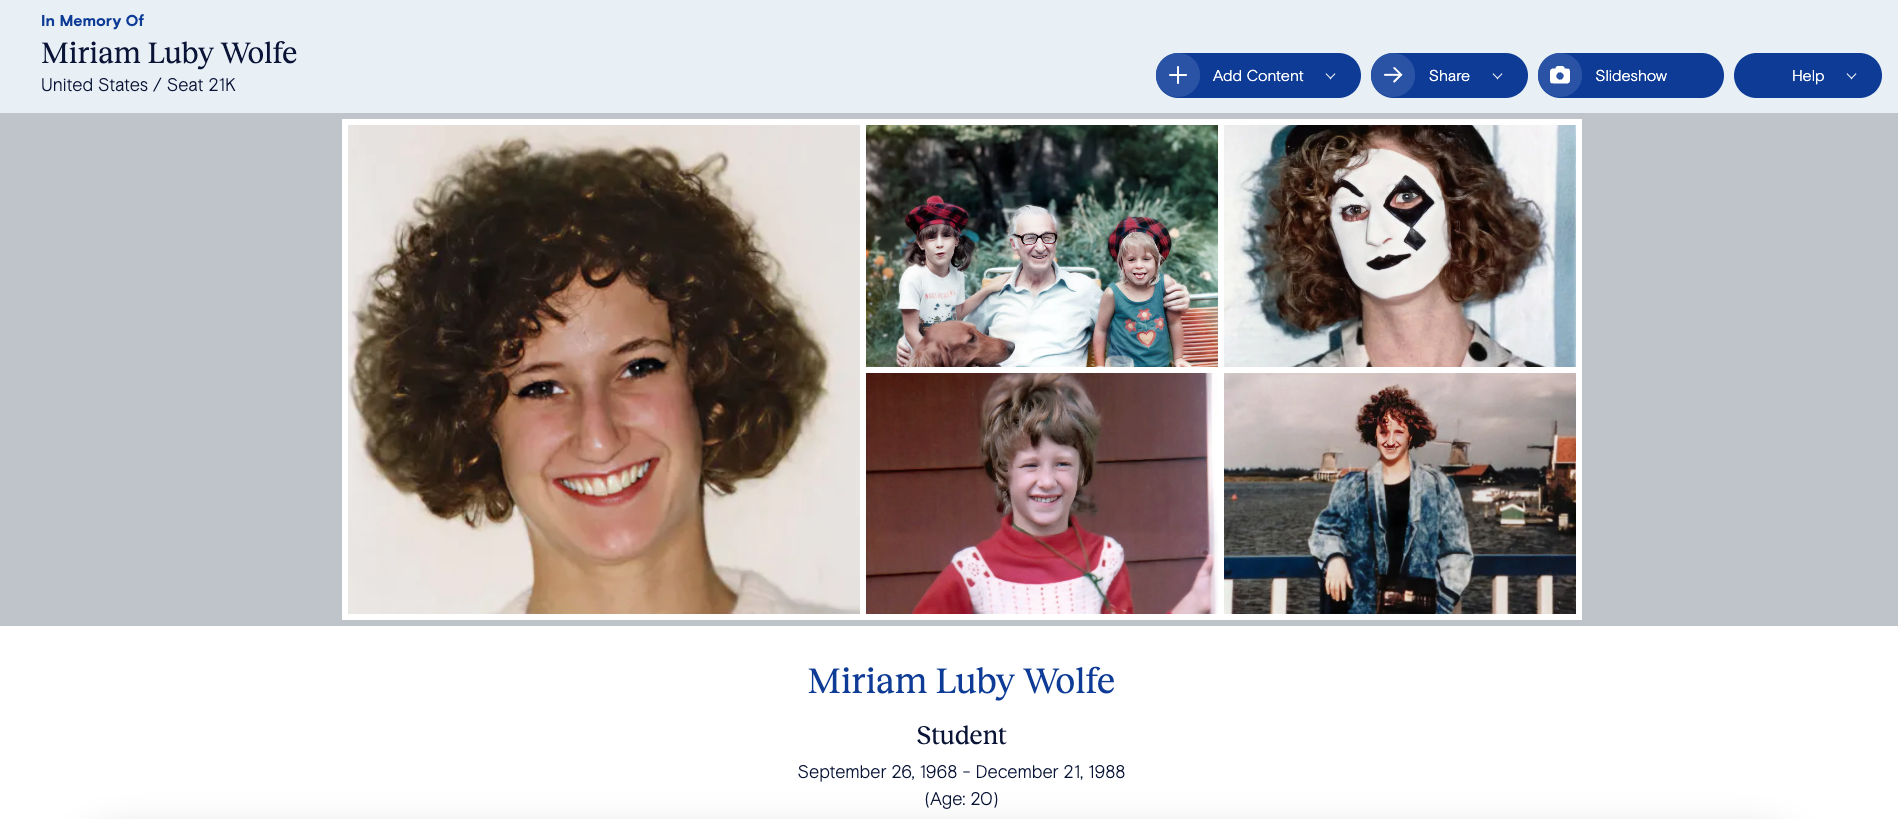 Miriam Luby Wolfe Living Memorial Page 